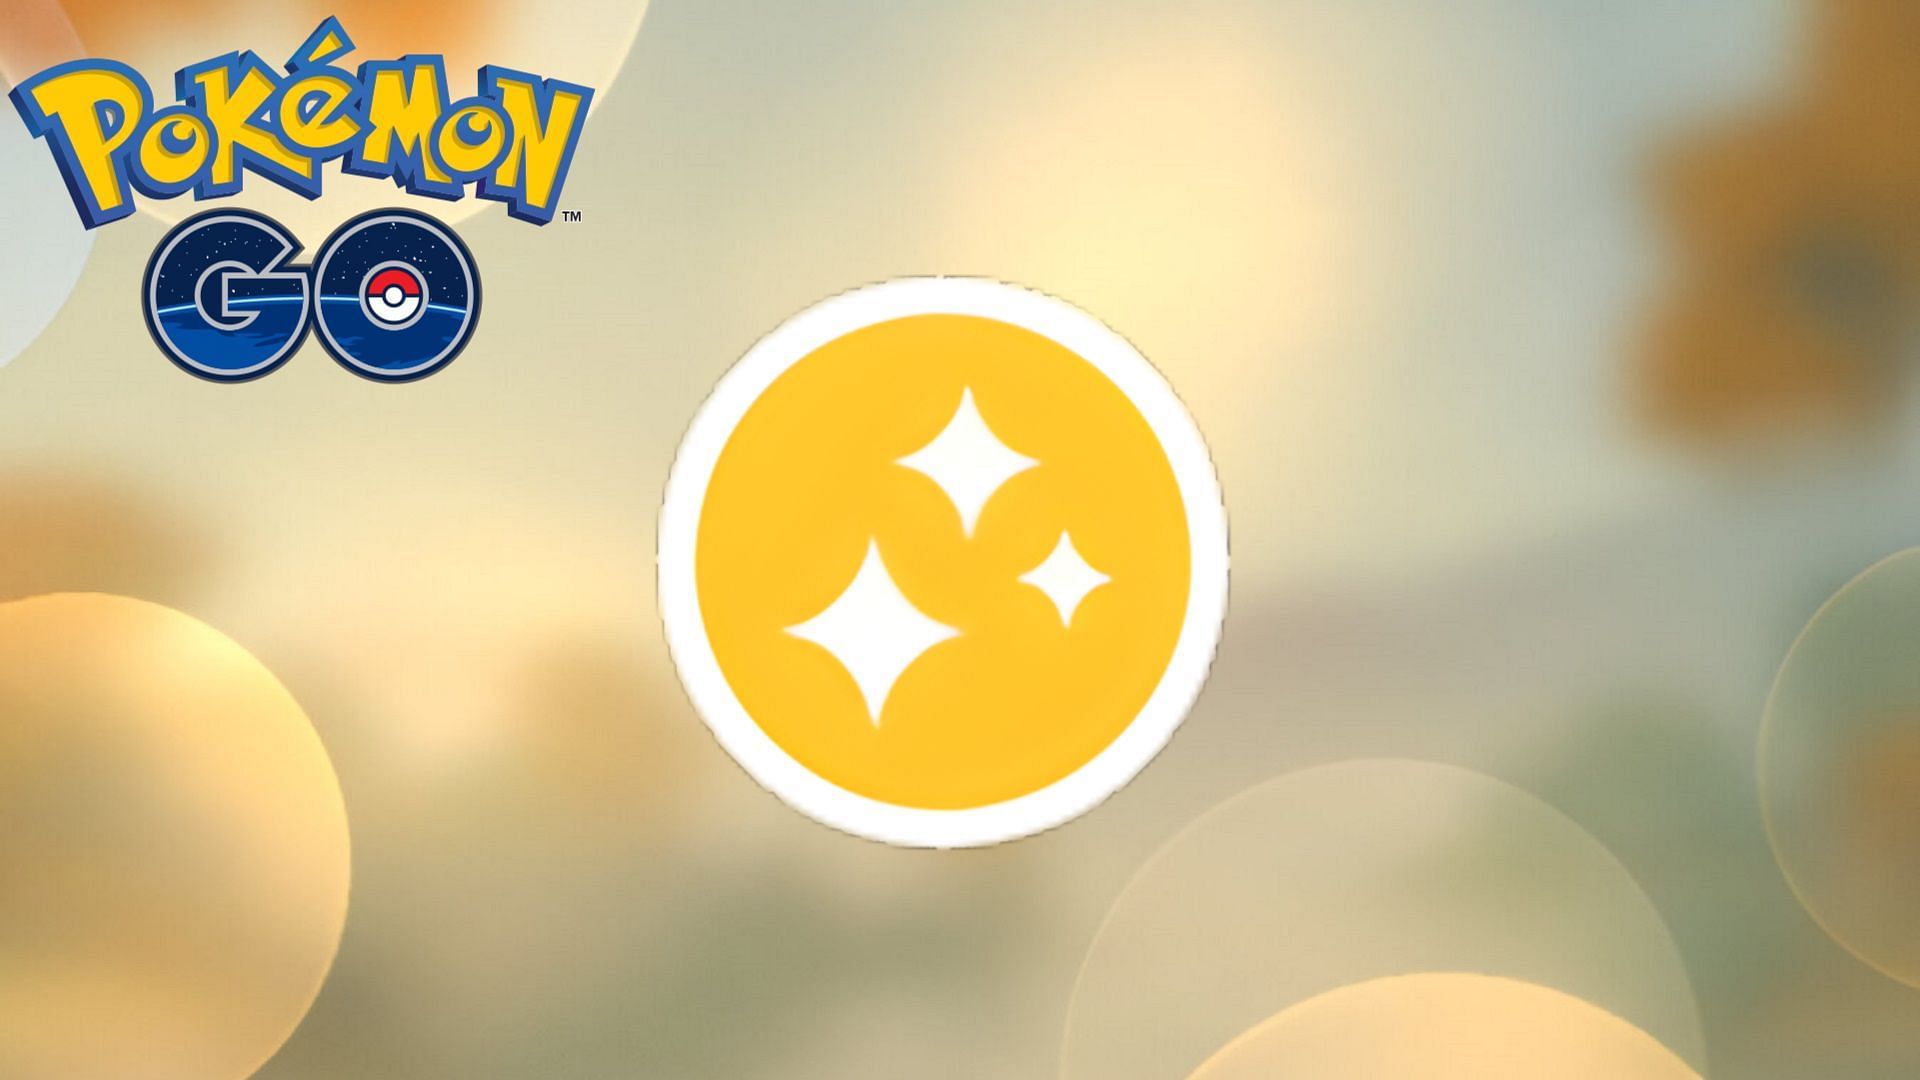 The symbol for a shiny Pokemon as it